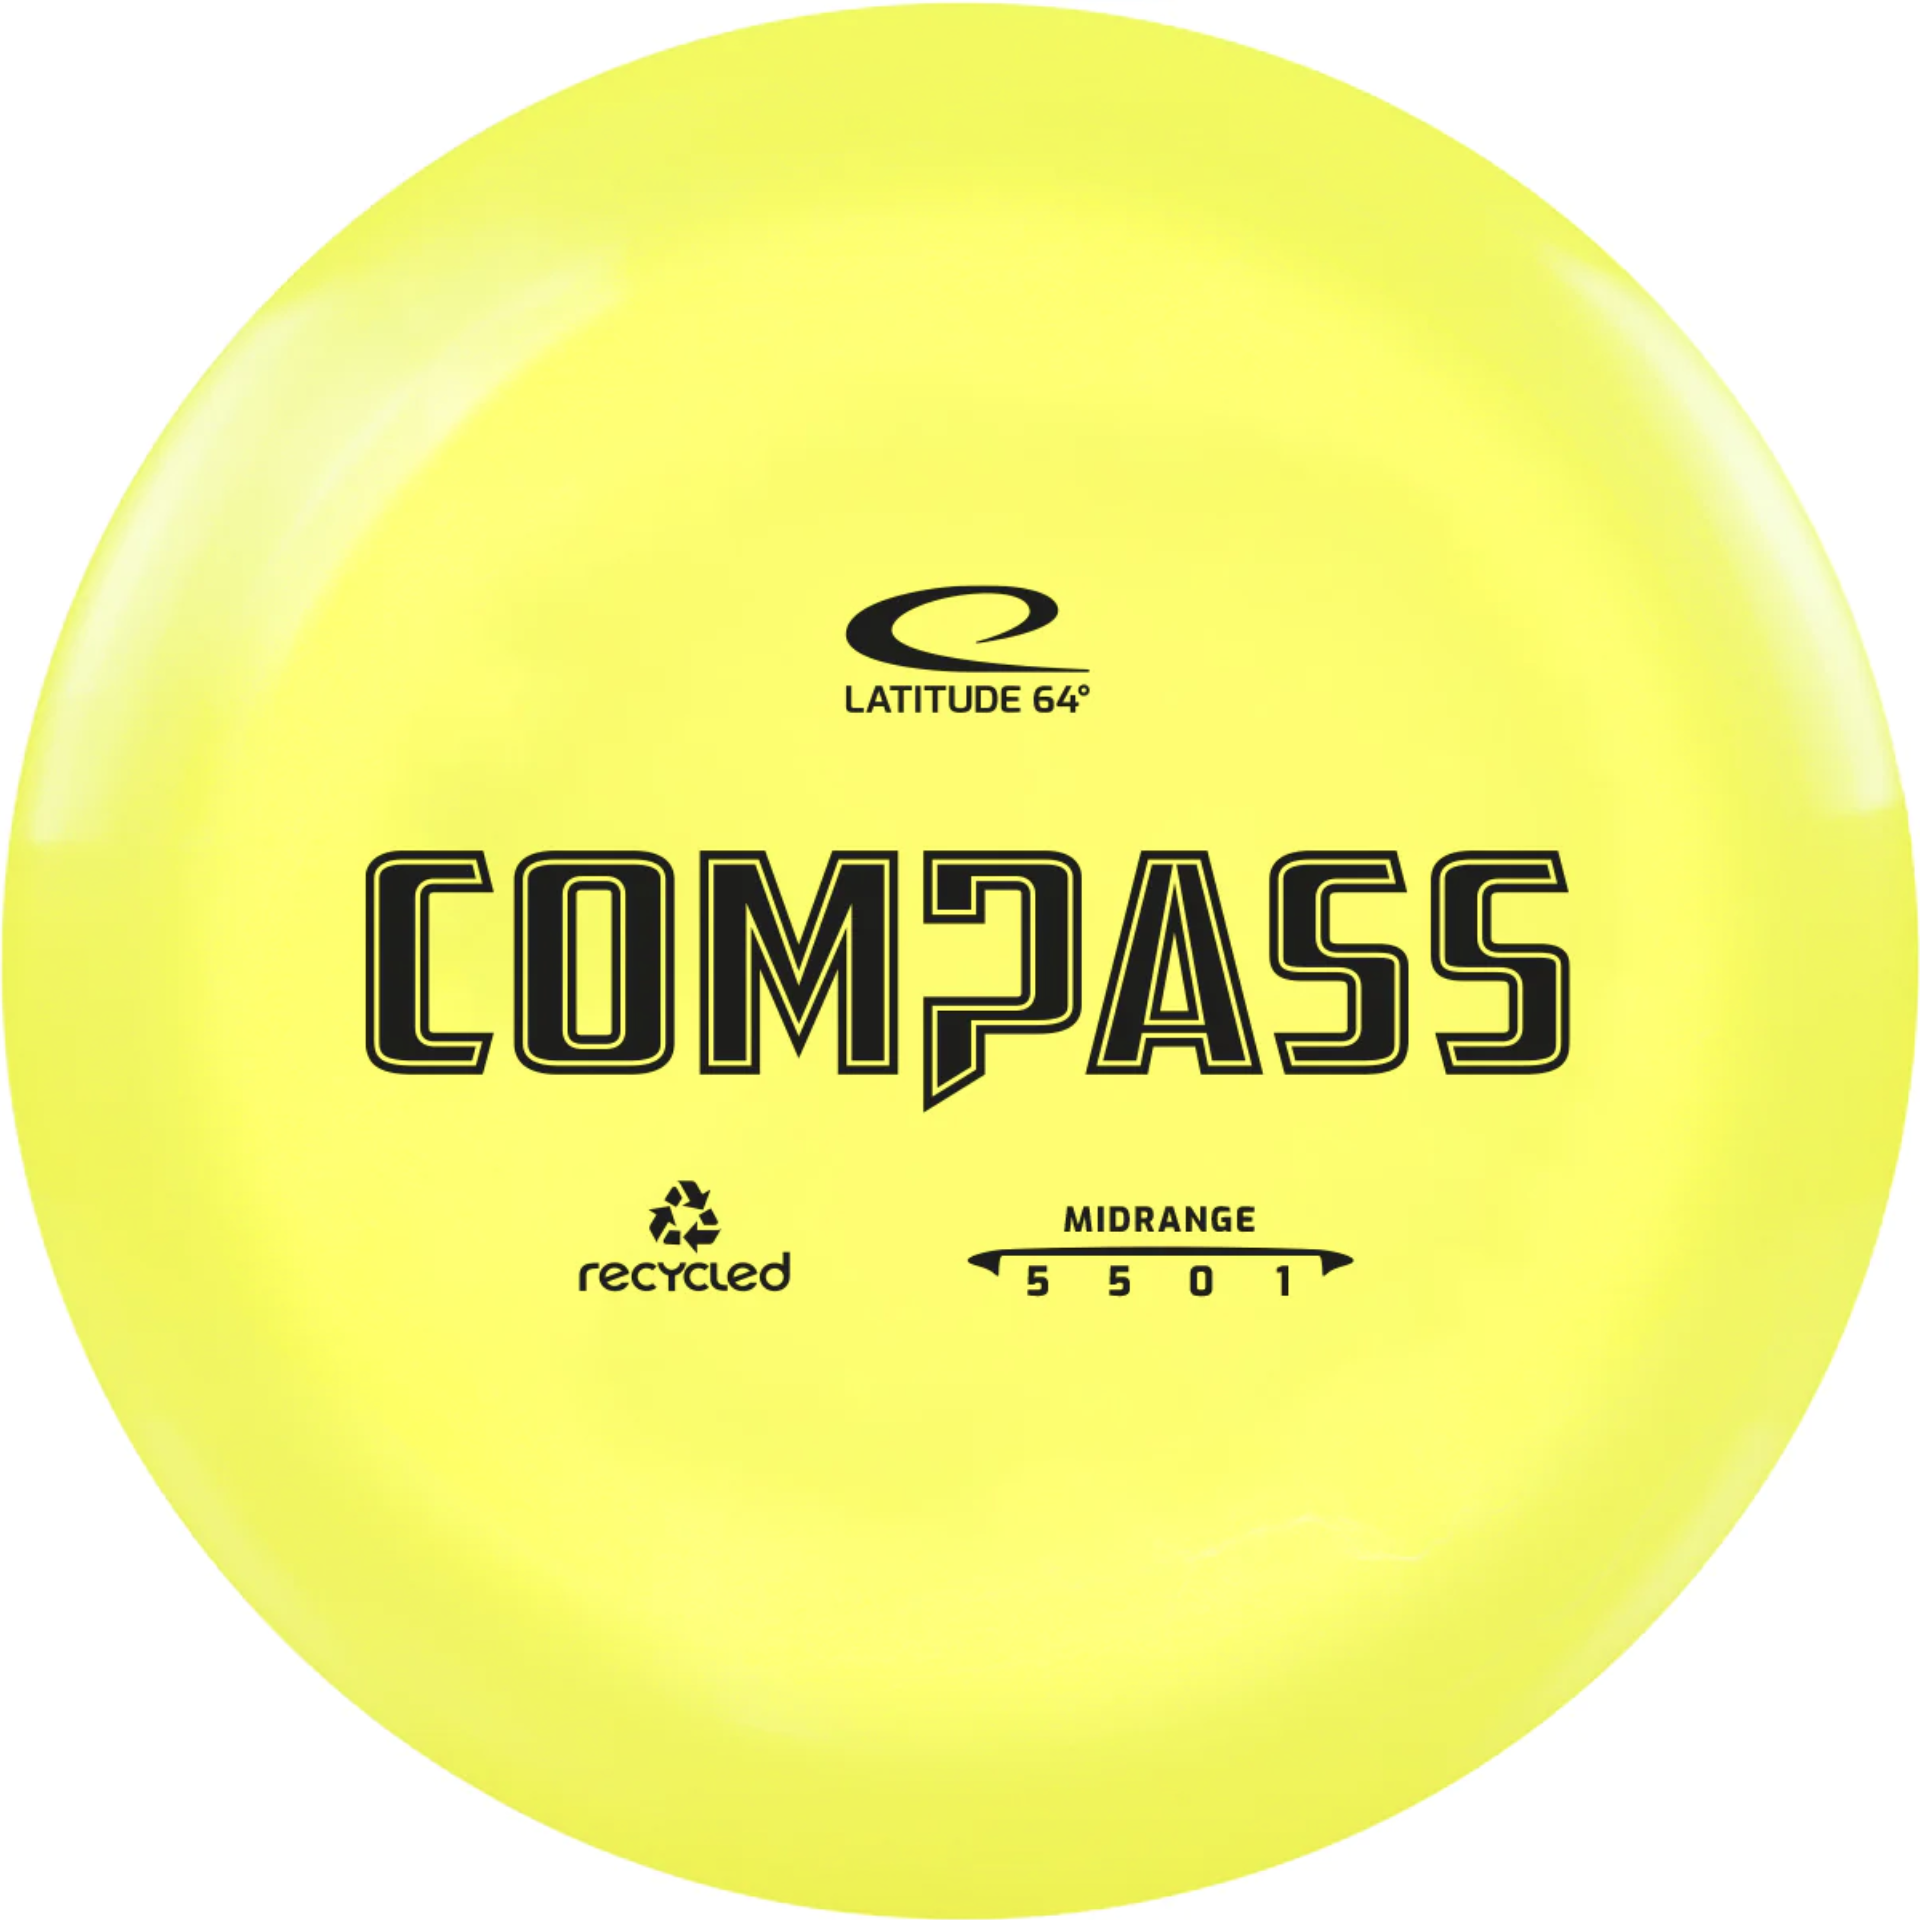 Latitude 64 – Recycled Compass